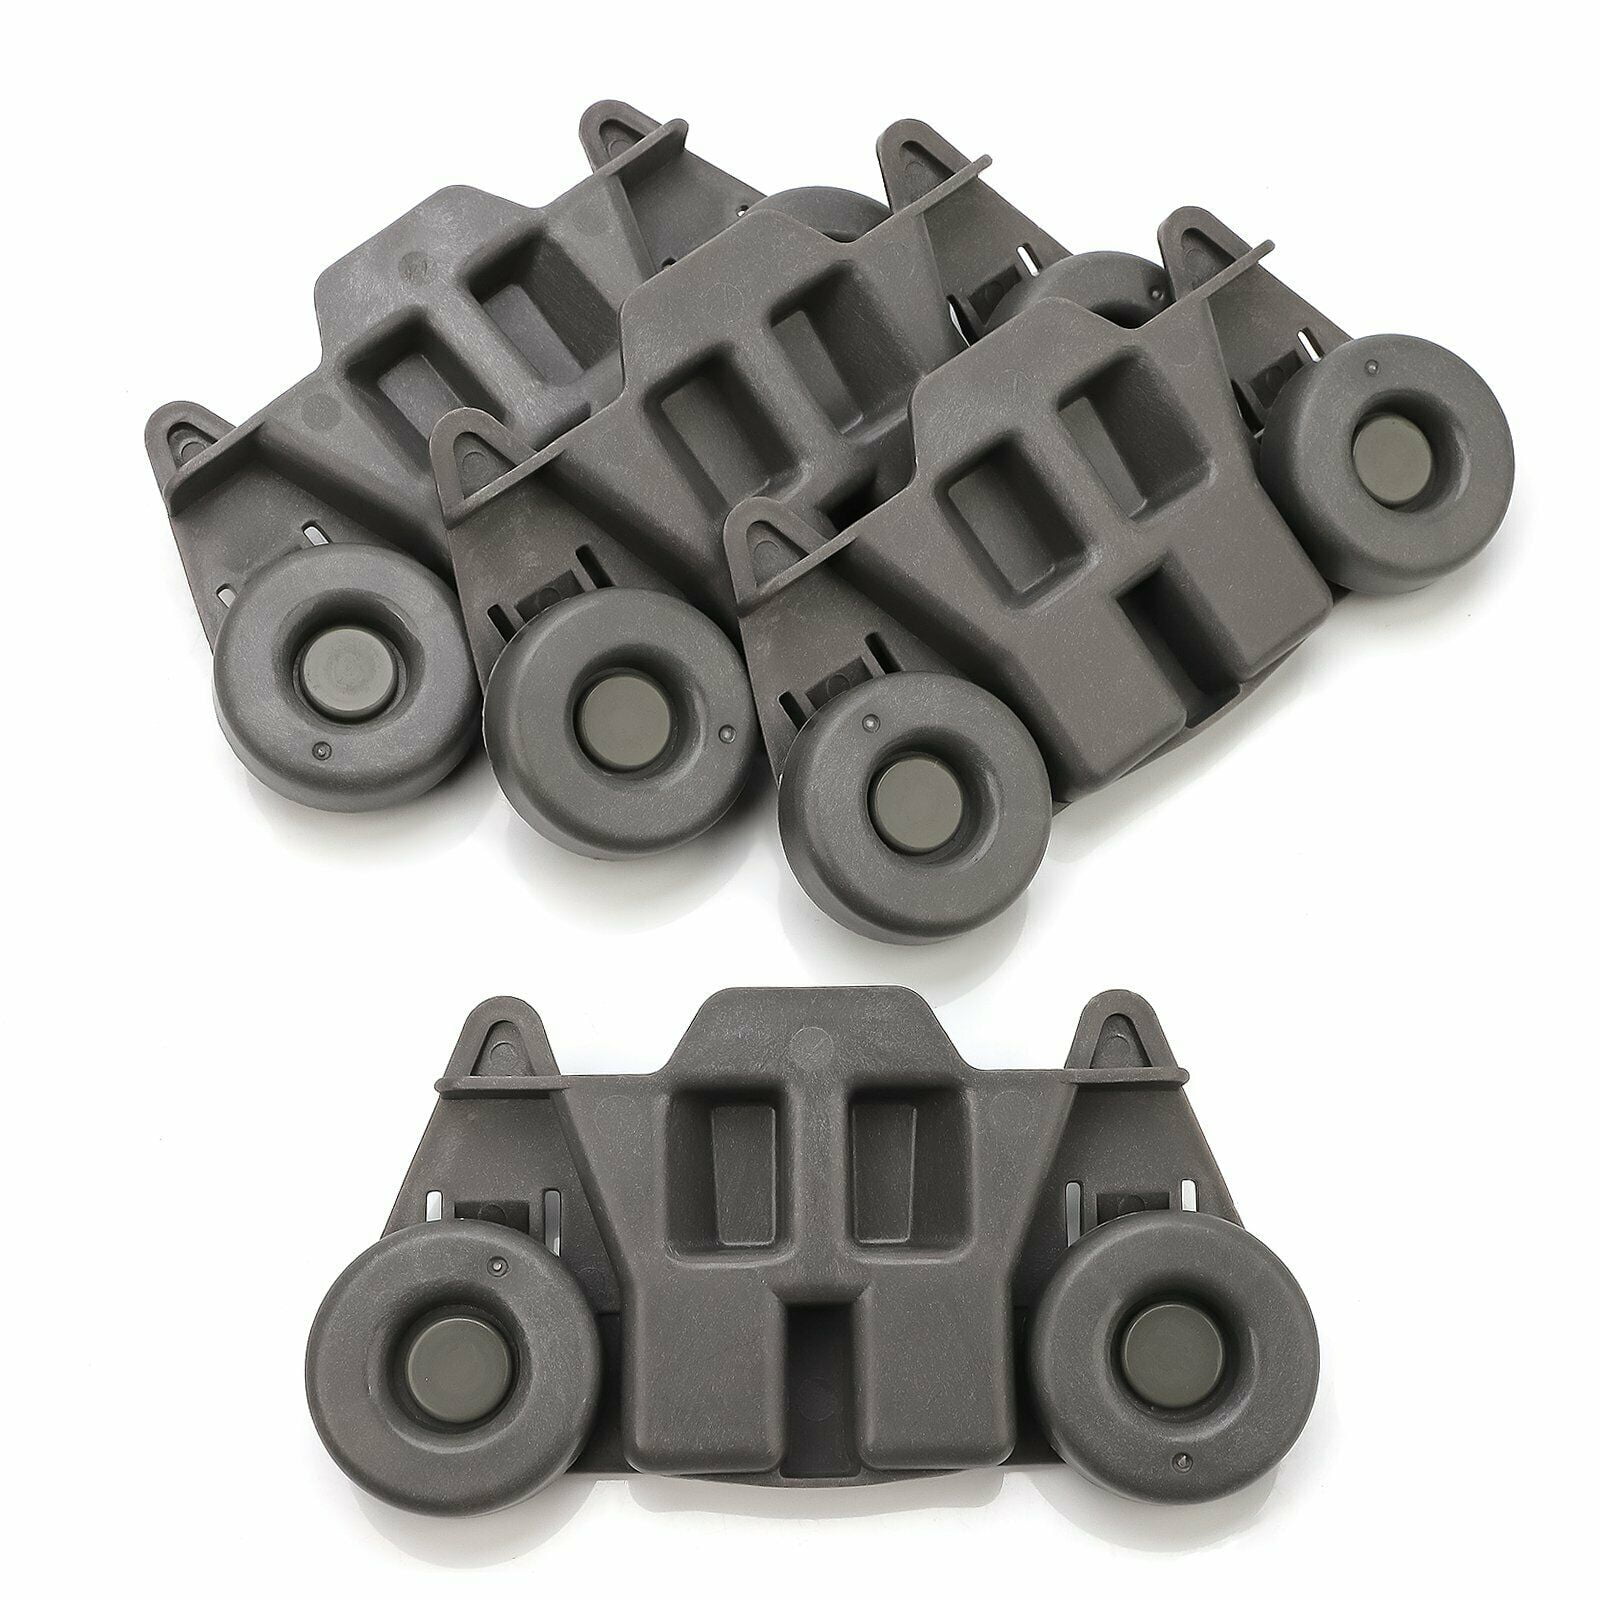 WPW10195416 4 PACK Wheel Assembly for Whirlpool Dishwasher W10195416 